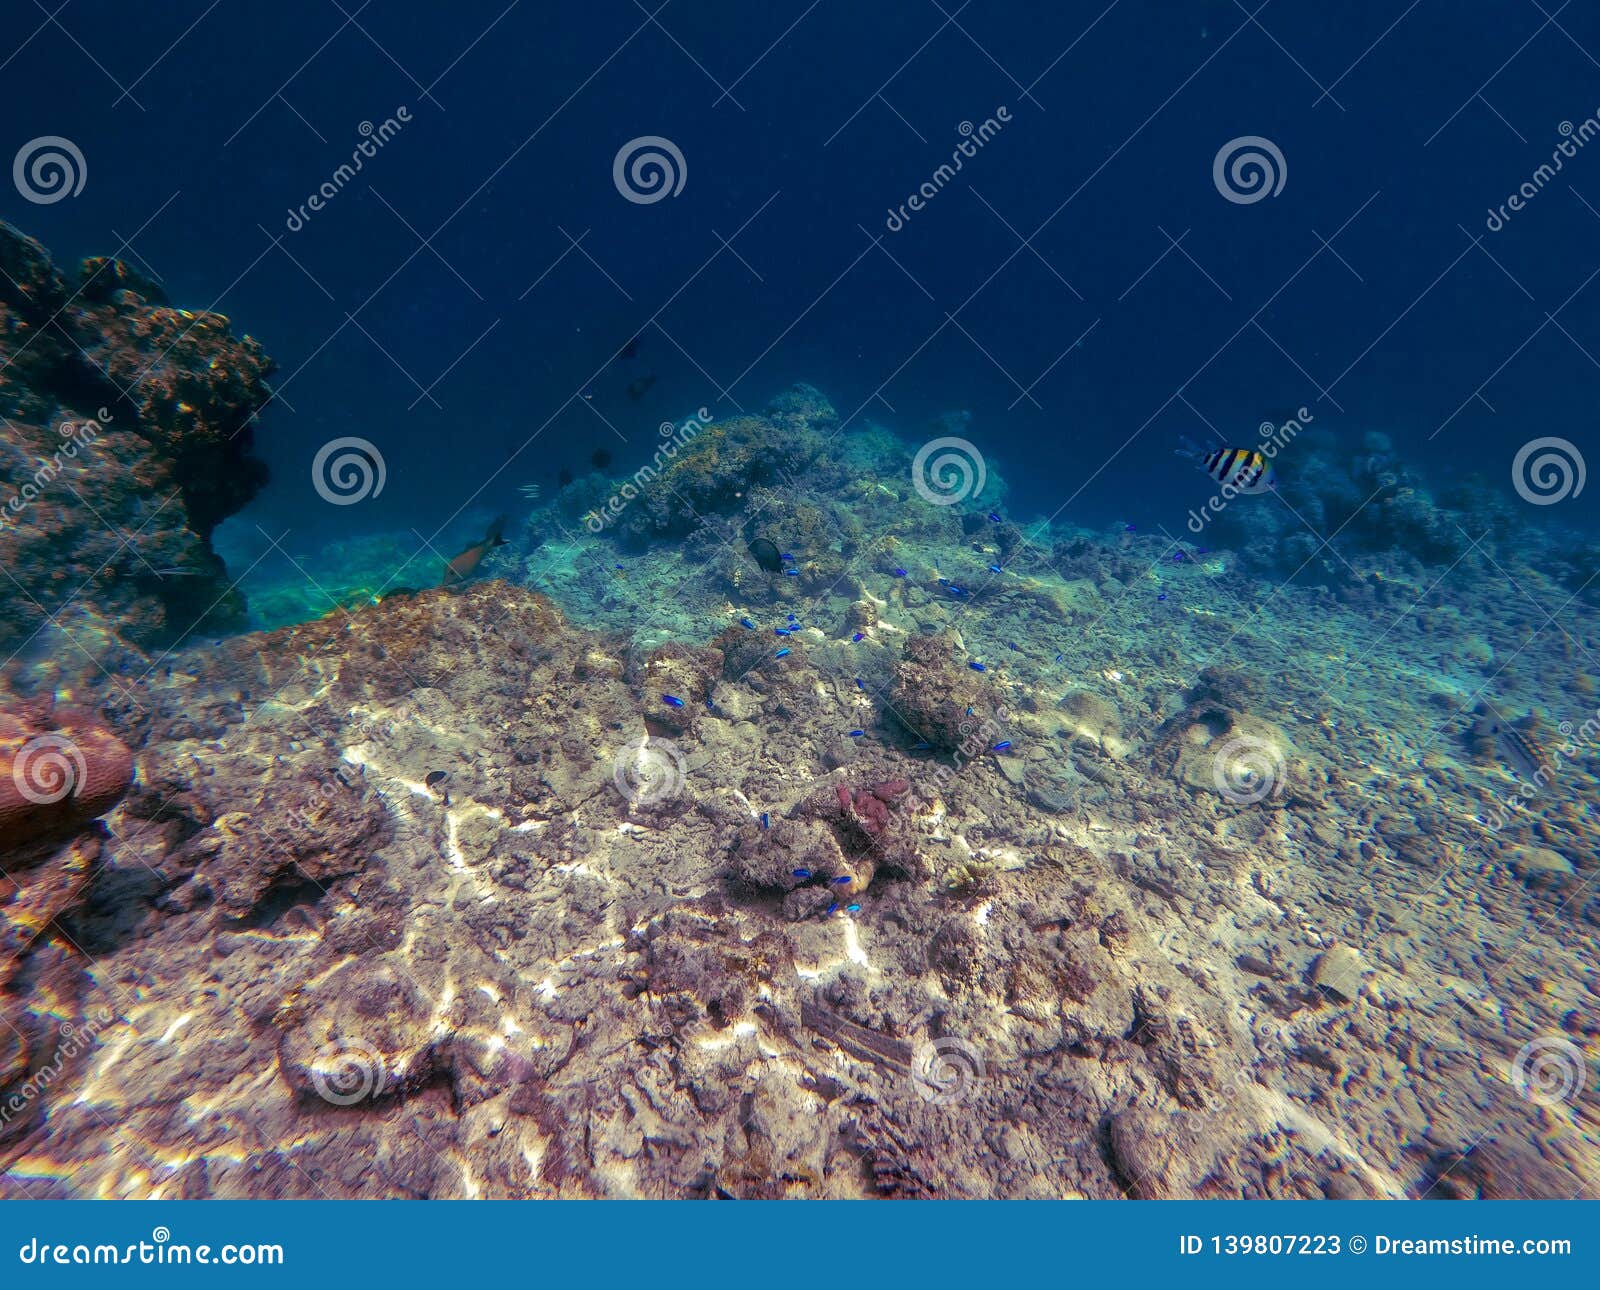 Dying Coral and Reef, Semporna, Sabah Stock Image - Image of fish ...